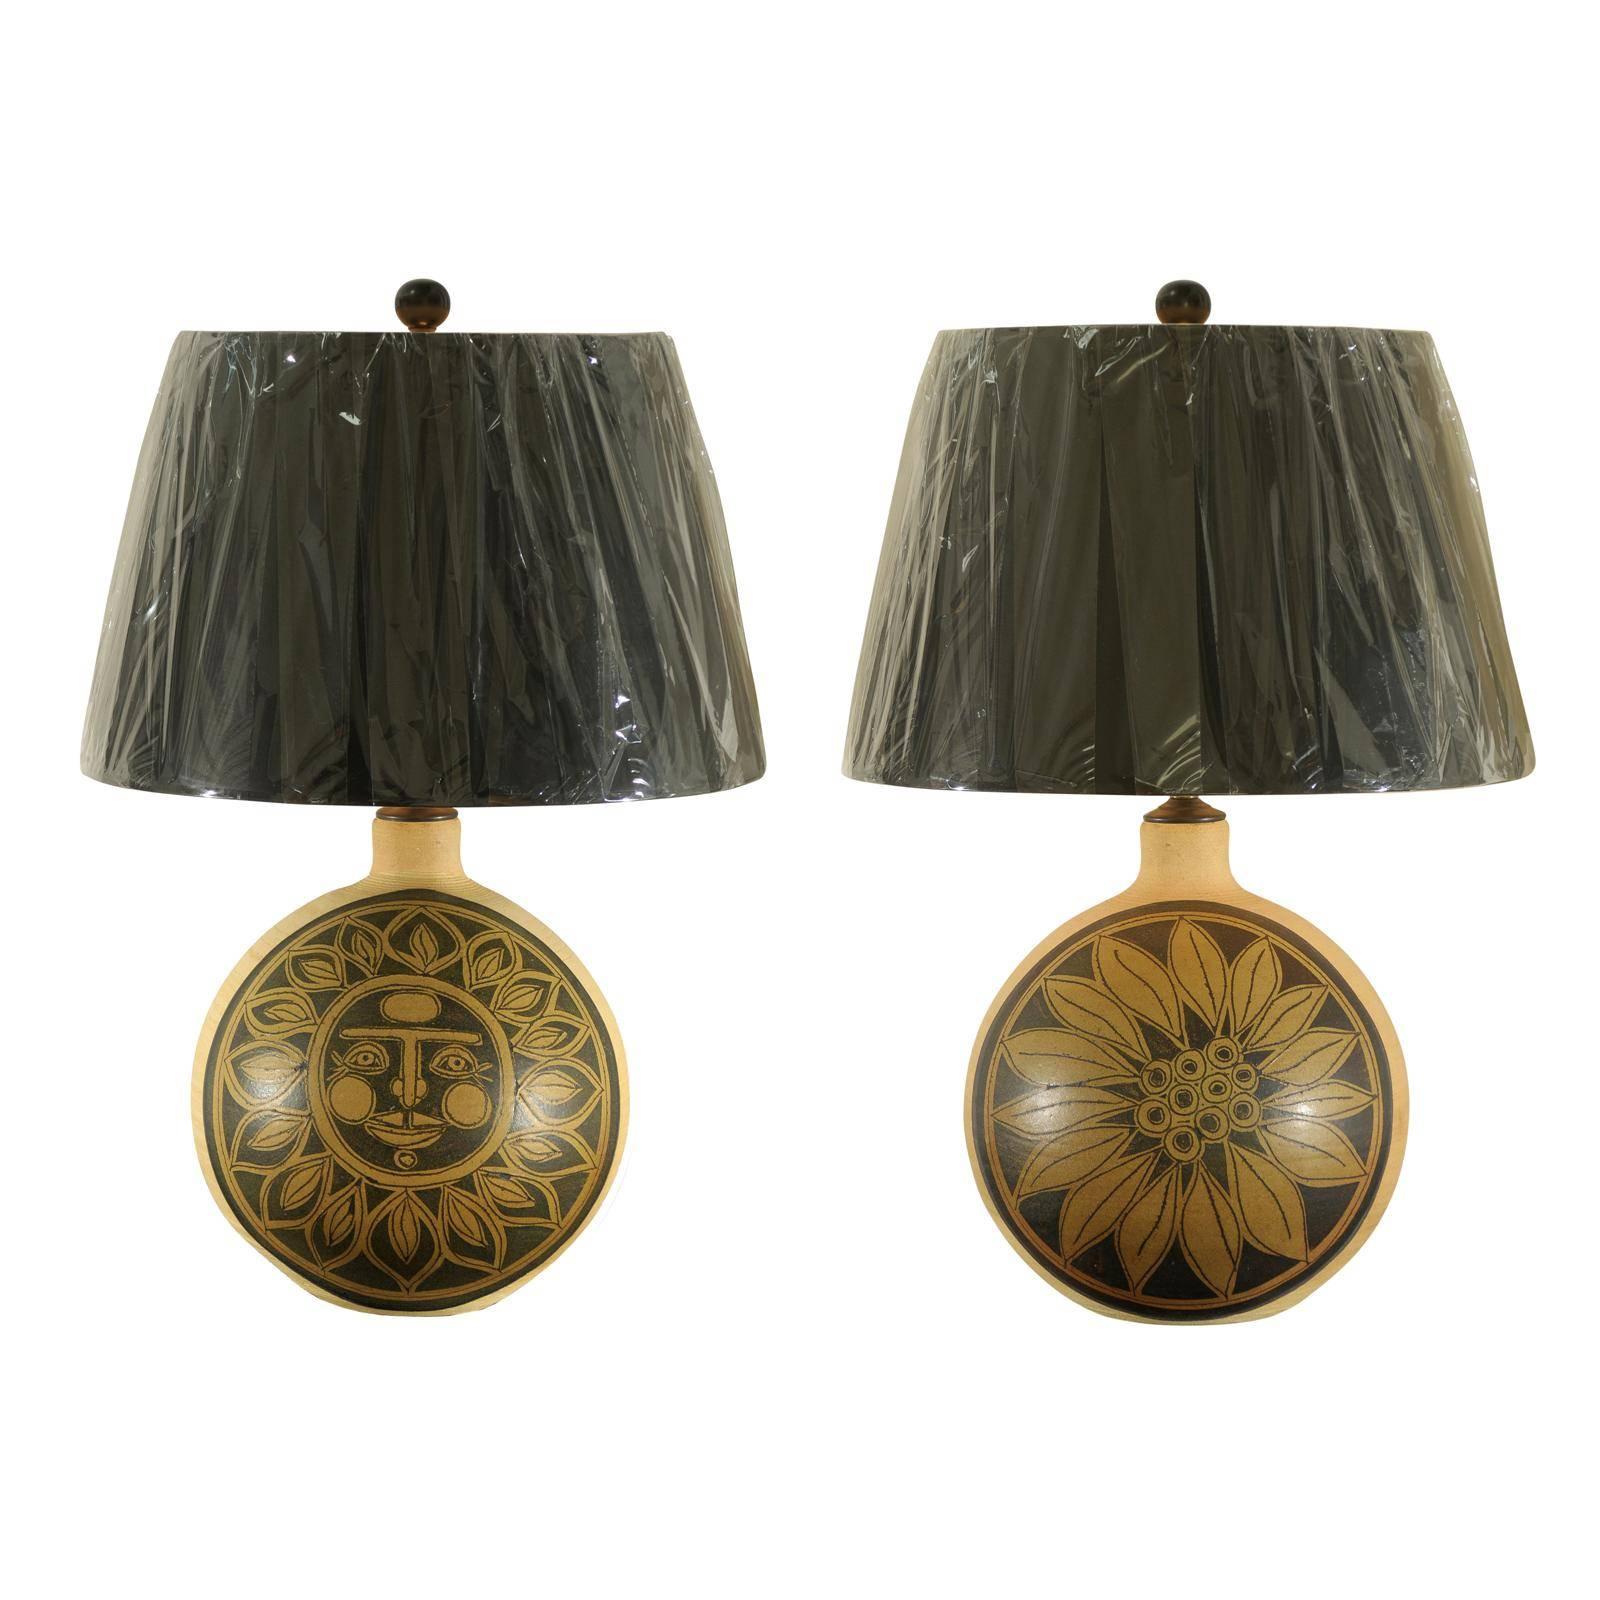 Spectacular Restored Pair of Vintage Ceramic Sun and Sunflower Lamps, circa 1960 For Sale